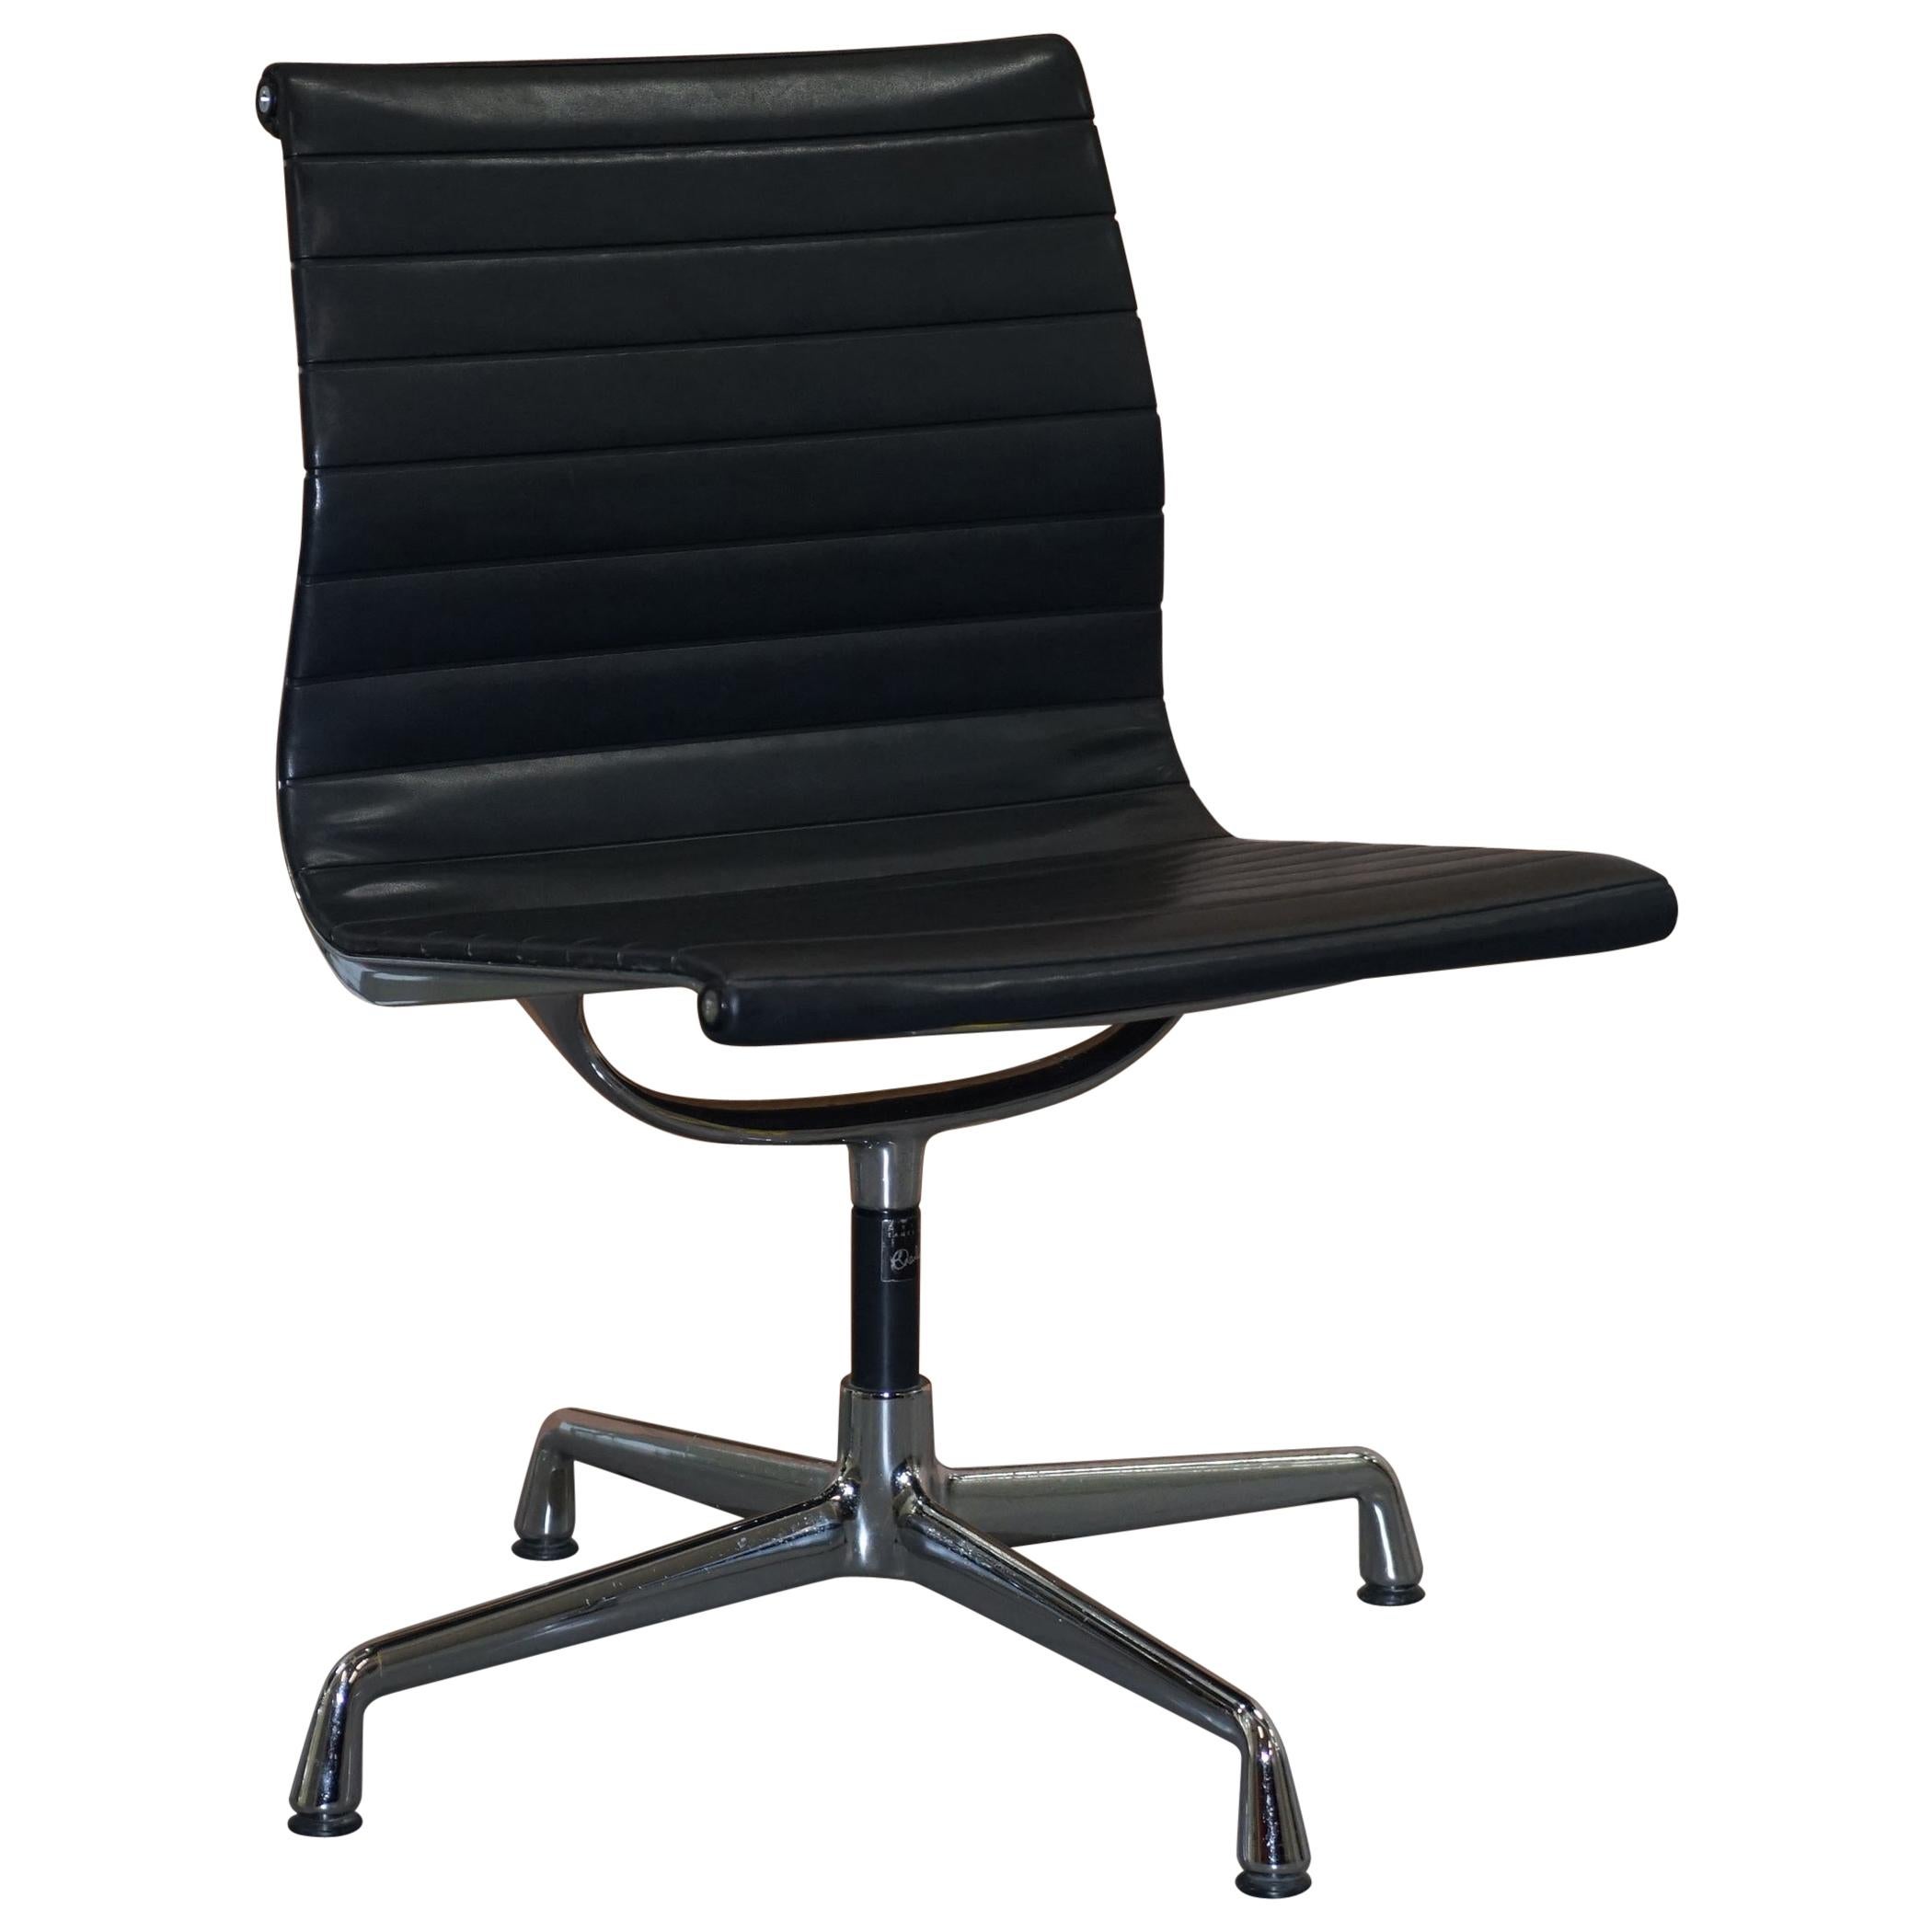 1 of 2  EA101 Vitra Eames Black Leather Office Swivel Conference Chairs